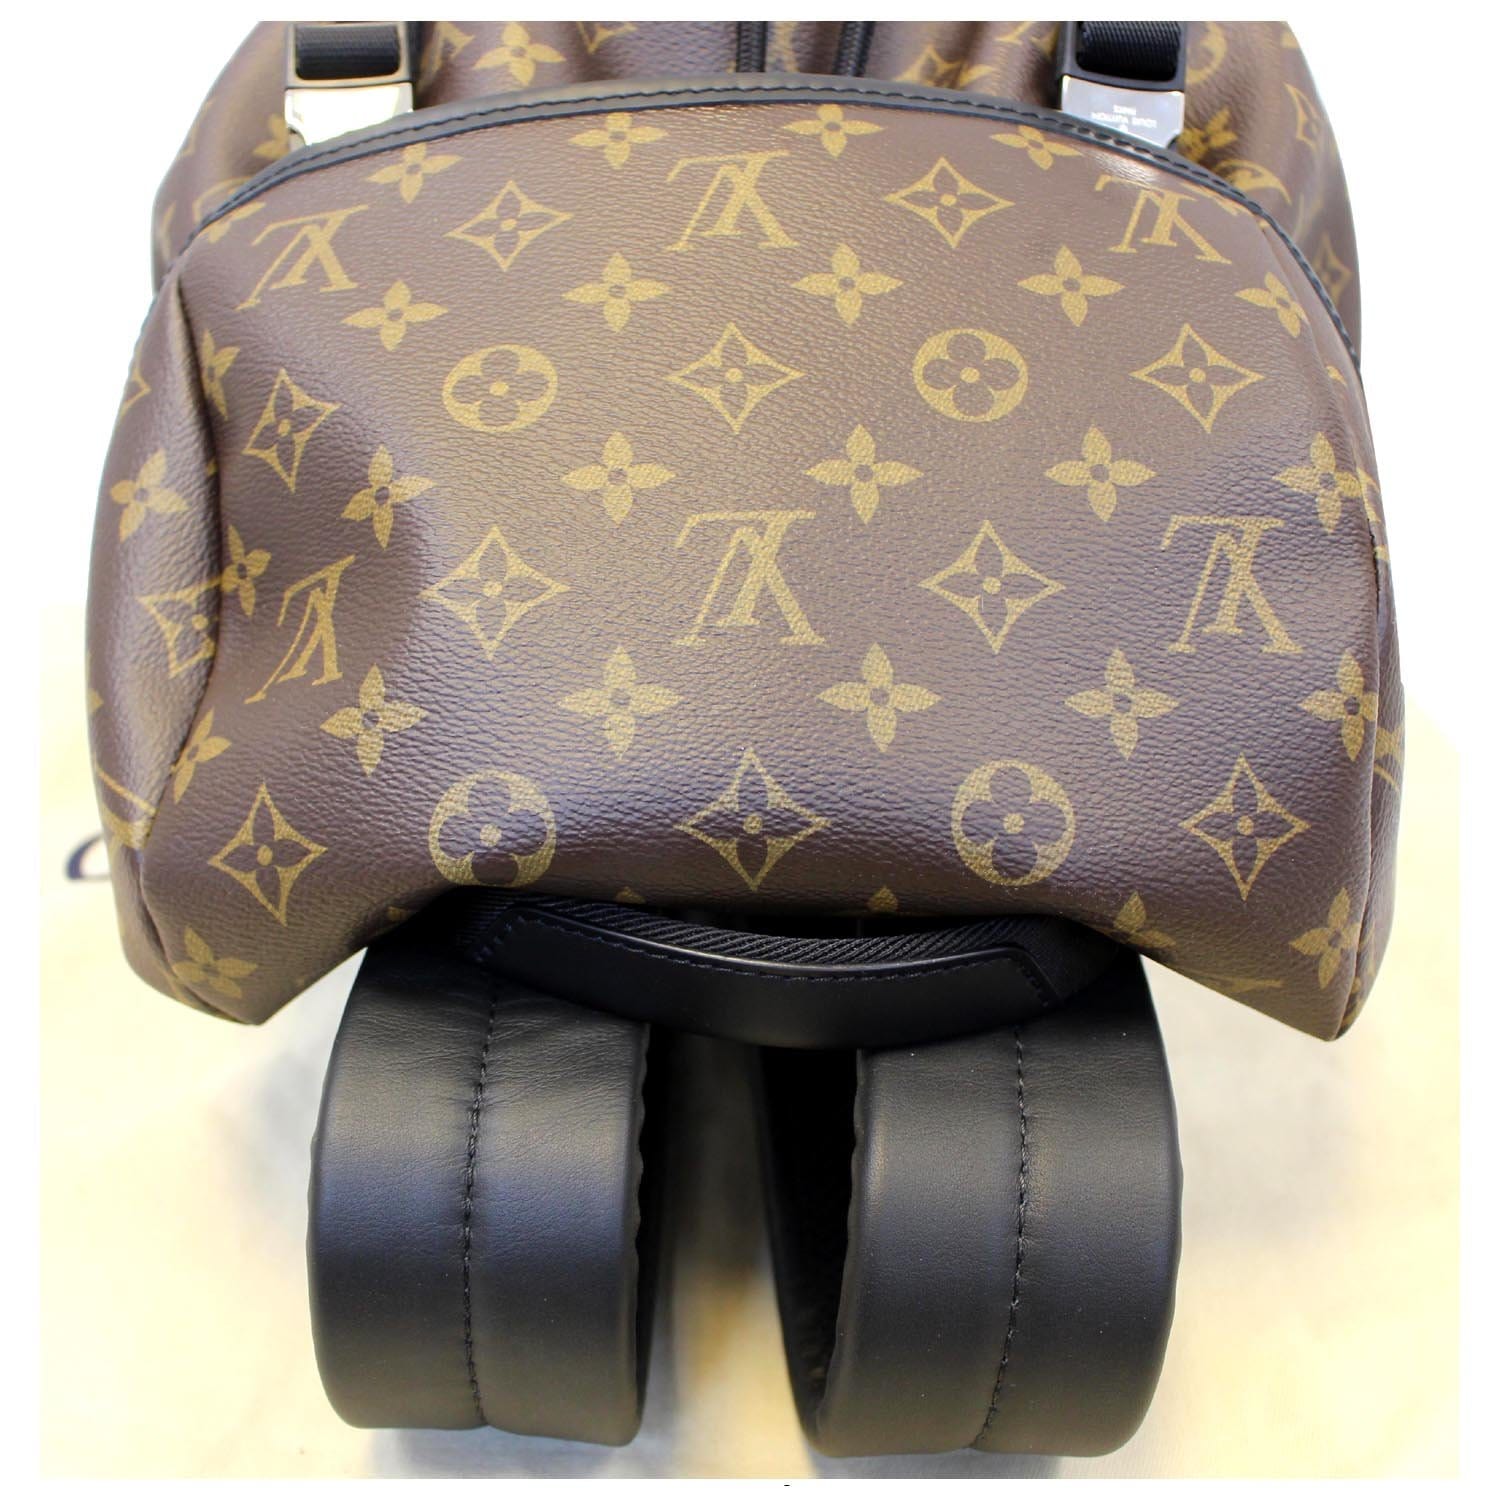 Louis Vuitton Zack Backpack – Pursekelly – high quality designer